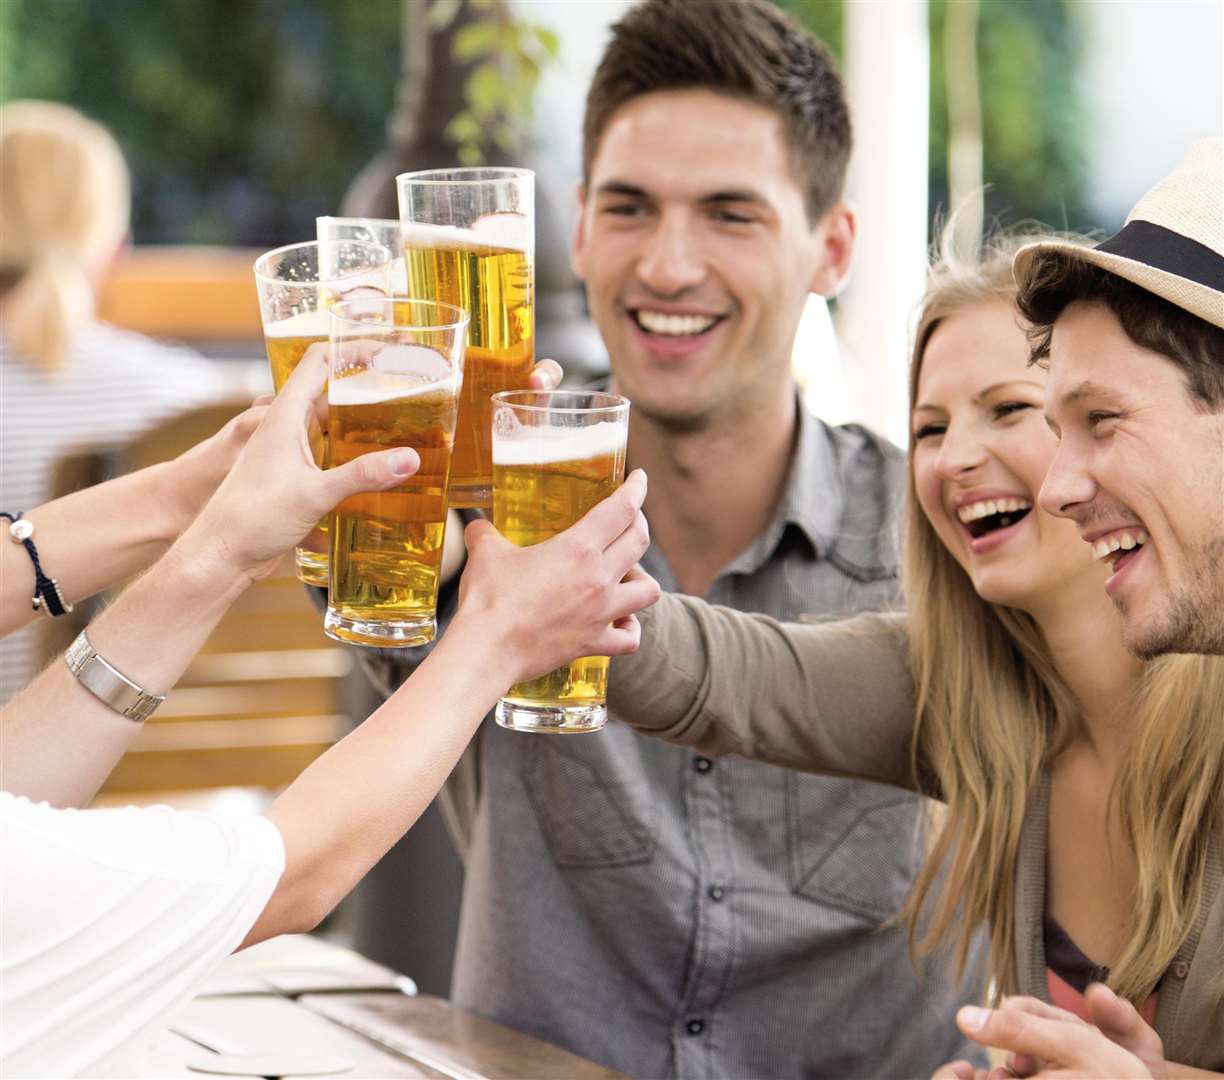 The perfect day for a pint - National Beer Day is here again! COPYRIGHT: Anna Gontarek-Janicka/Getty Images/iStockphoto